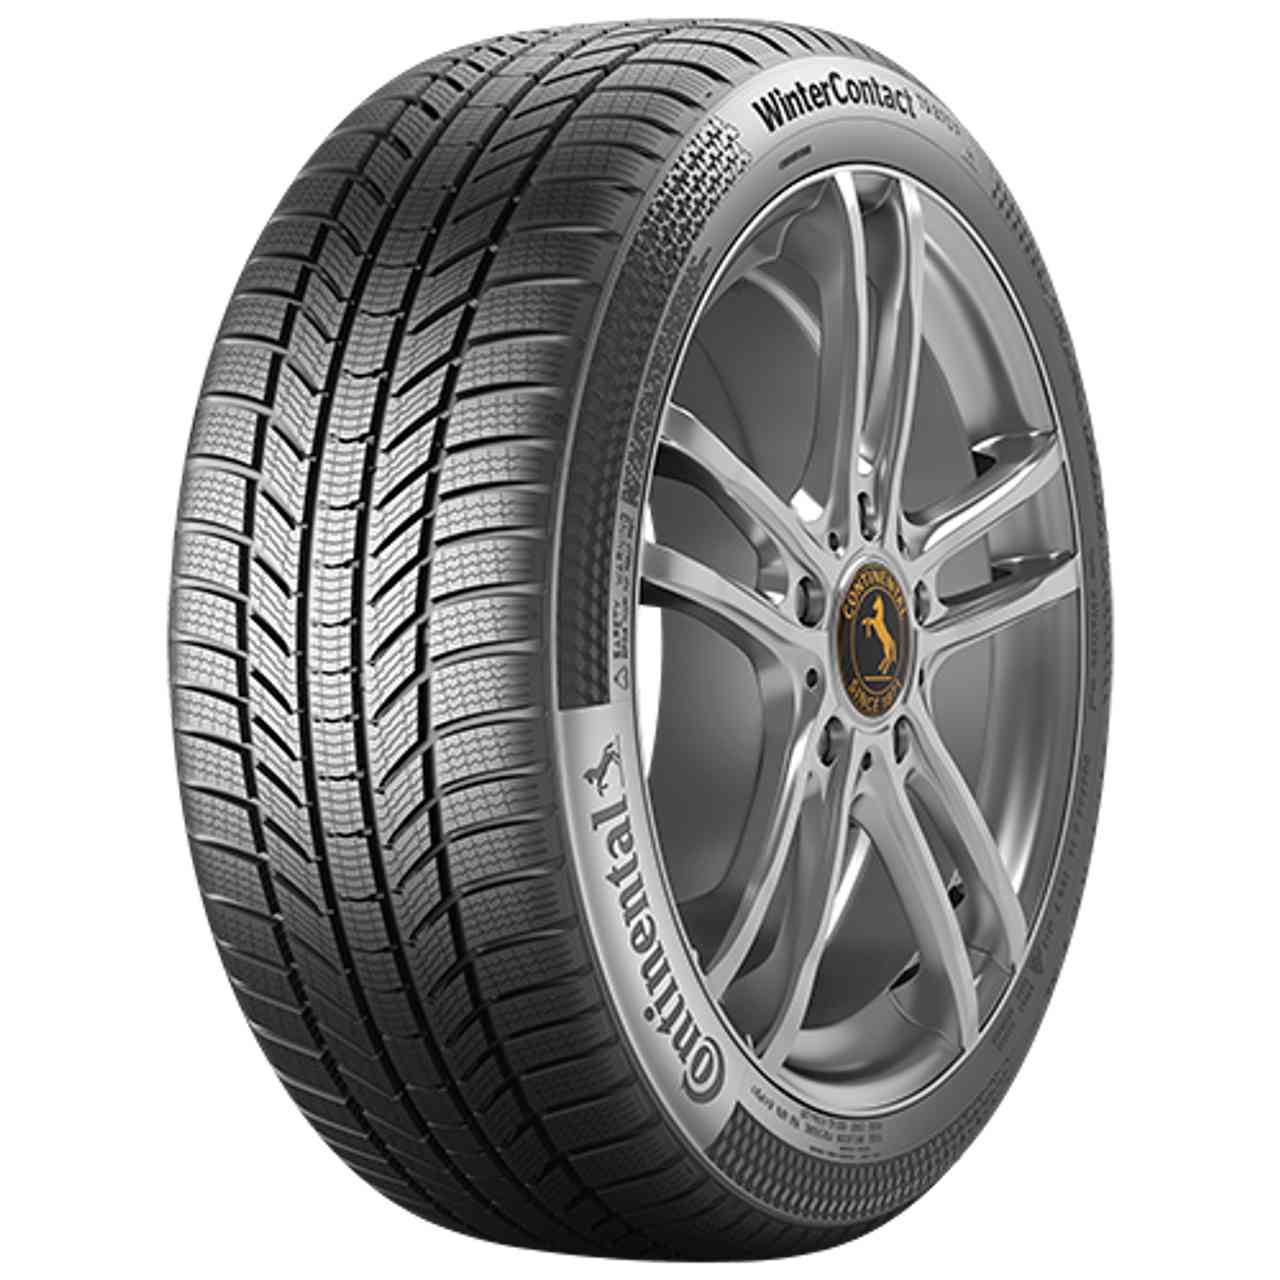 CONTINENTAL WINTERCONTACT TS 870 P (EVc) 255/70R16 111T BSW